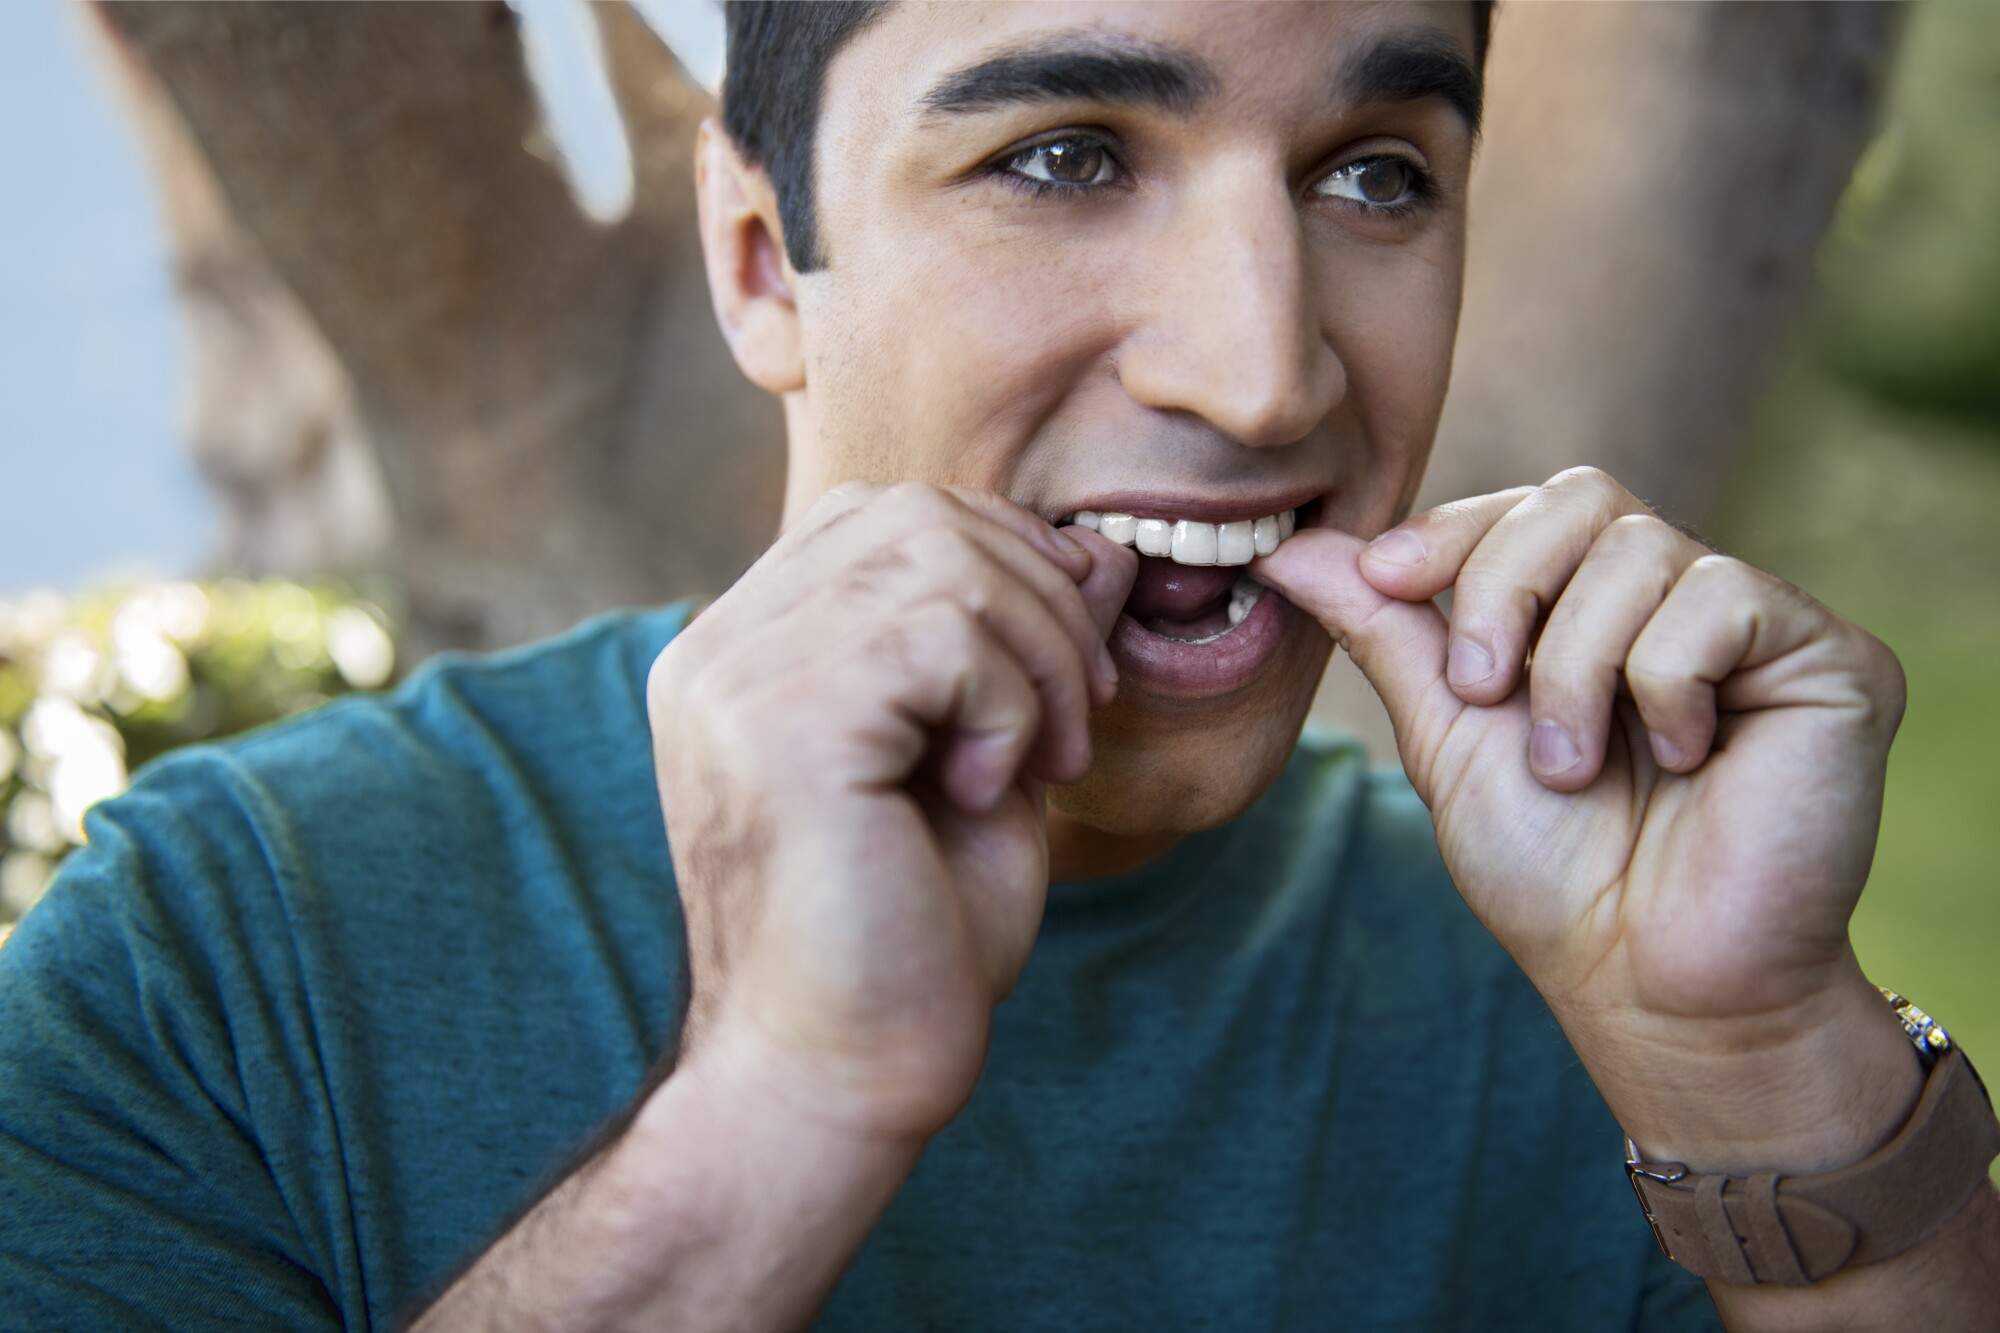 Clear Dental Aligners: Deciding if They’re Right for You